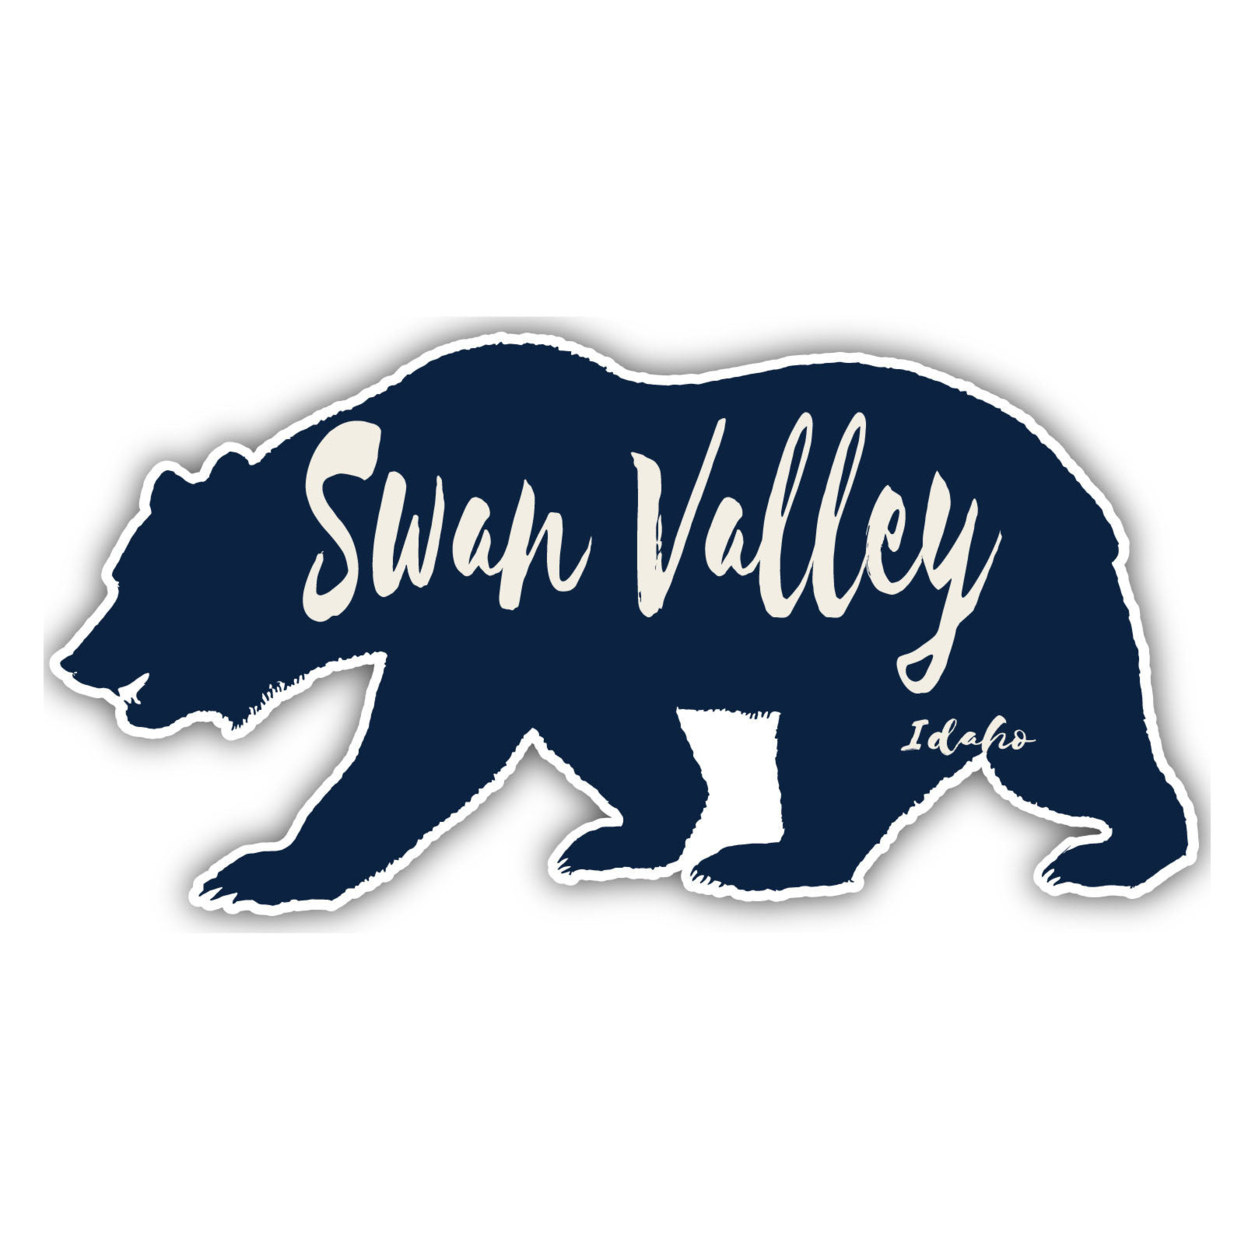 Swan Valley Idaho Souvenir Decorative Stickers (Choose Theme And Size) - Single Unit, 2-Inch, Great Outdoors